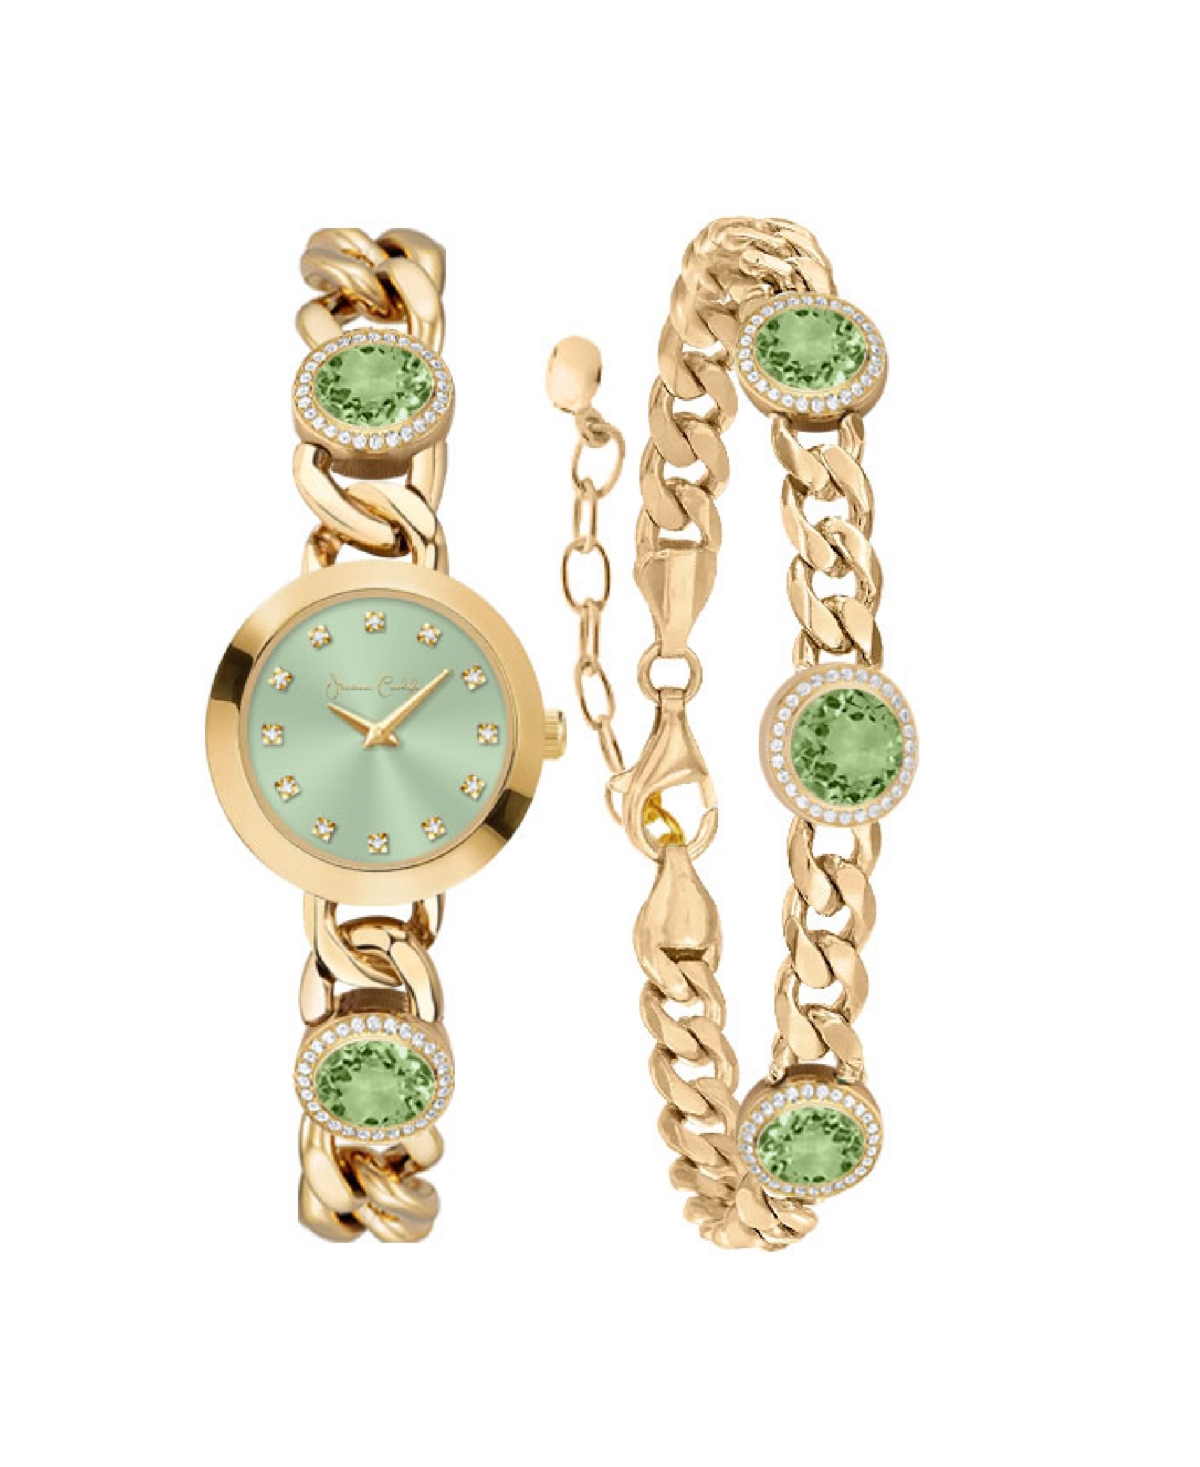 Jessica Carlyle Women's Quartz Gold-tone Alloy Watch 22.55mm Gift Set In Shiny Gold,light Green Sunray